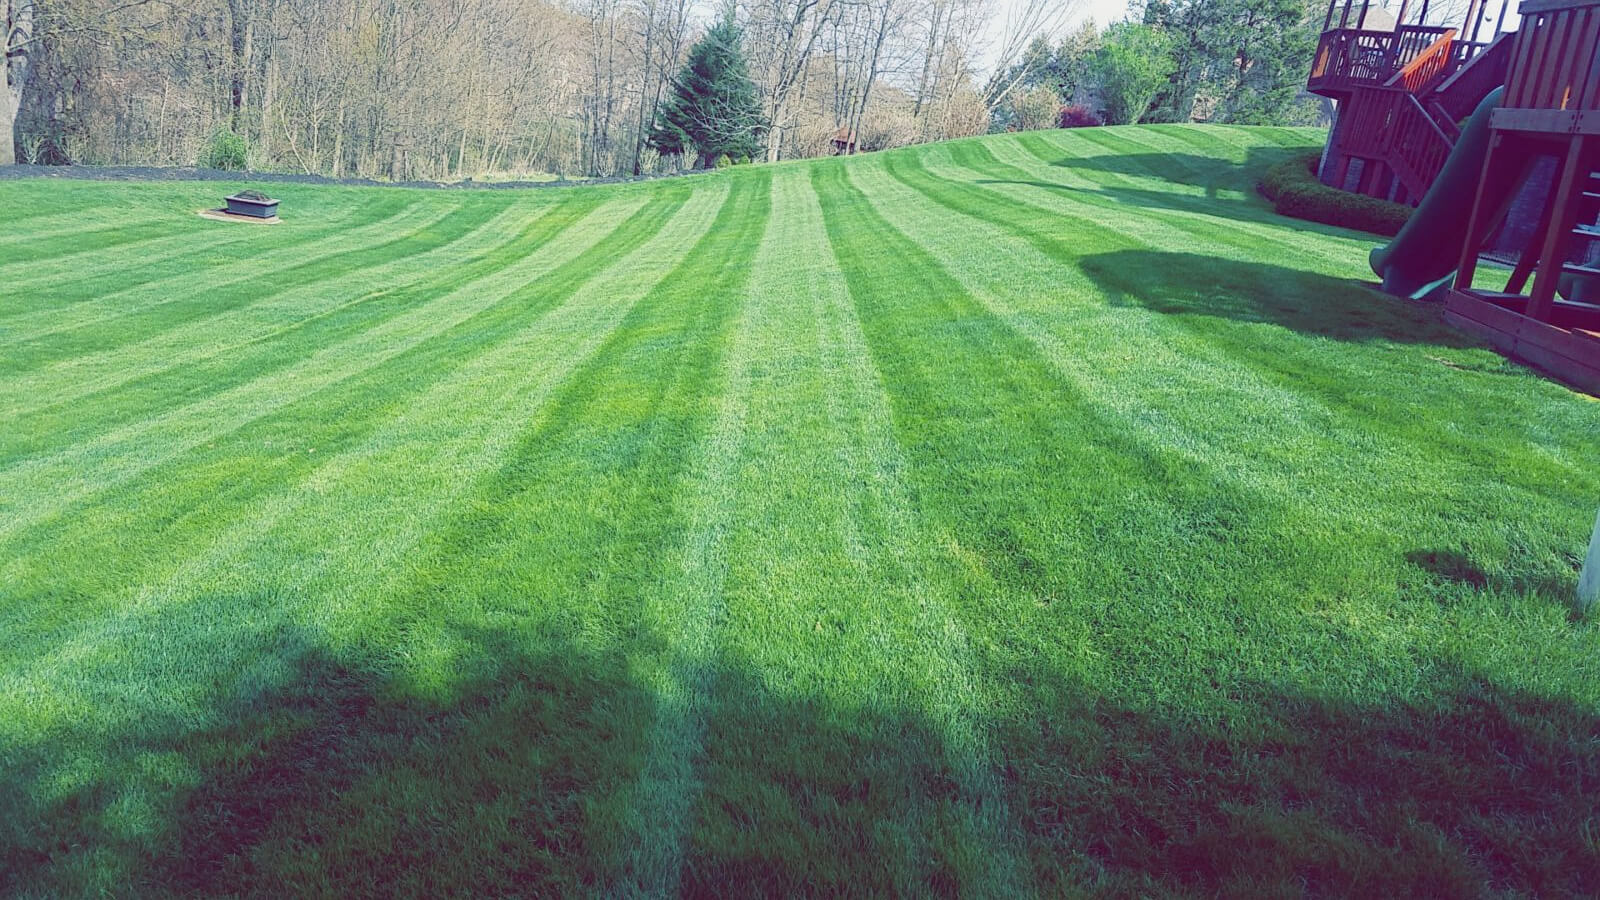 Grass Cutting And Lawn Maintenance Treesdale Landscape Company